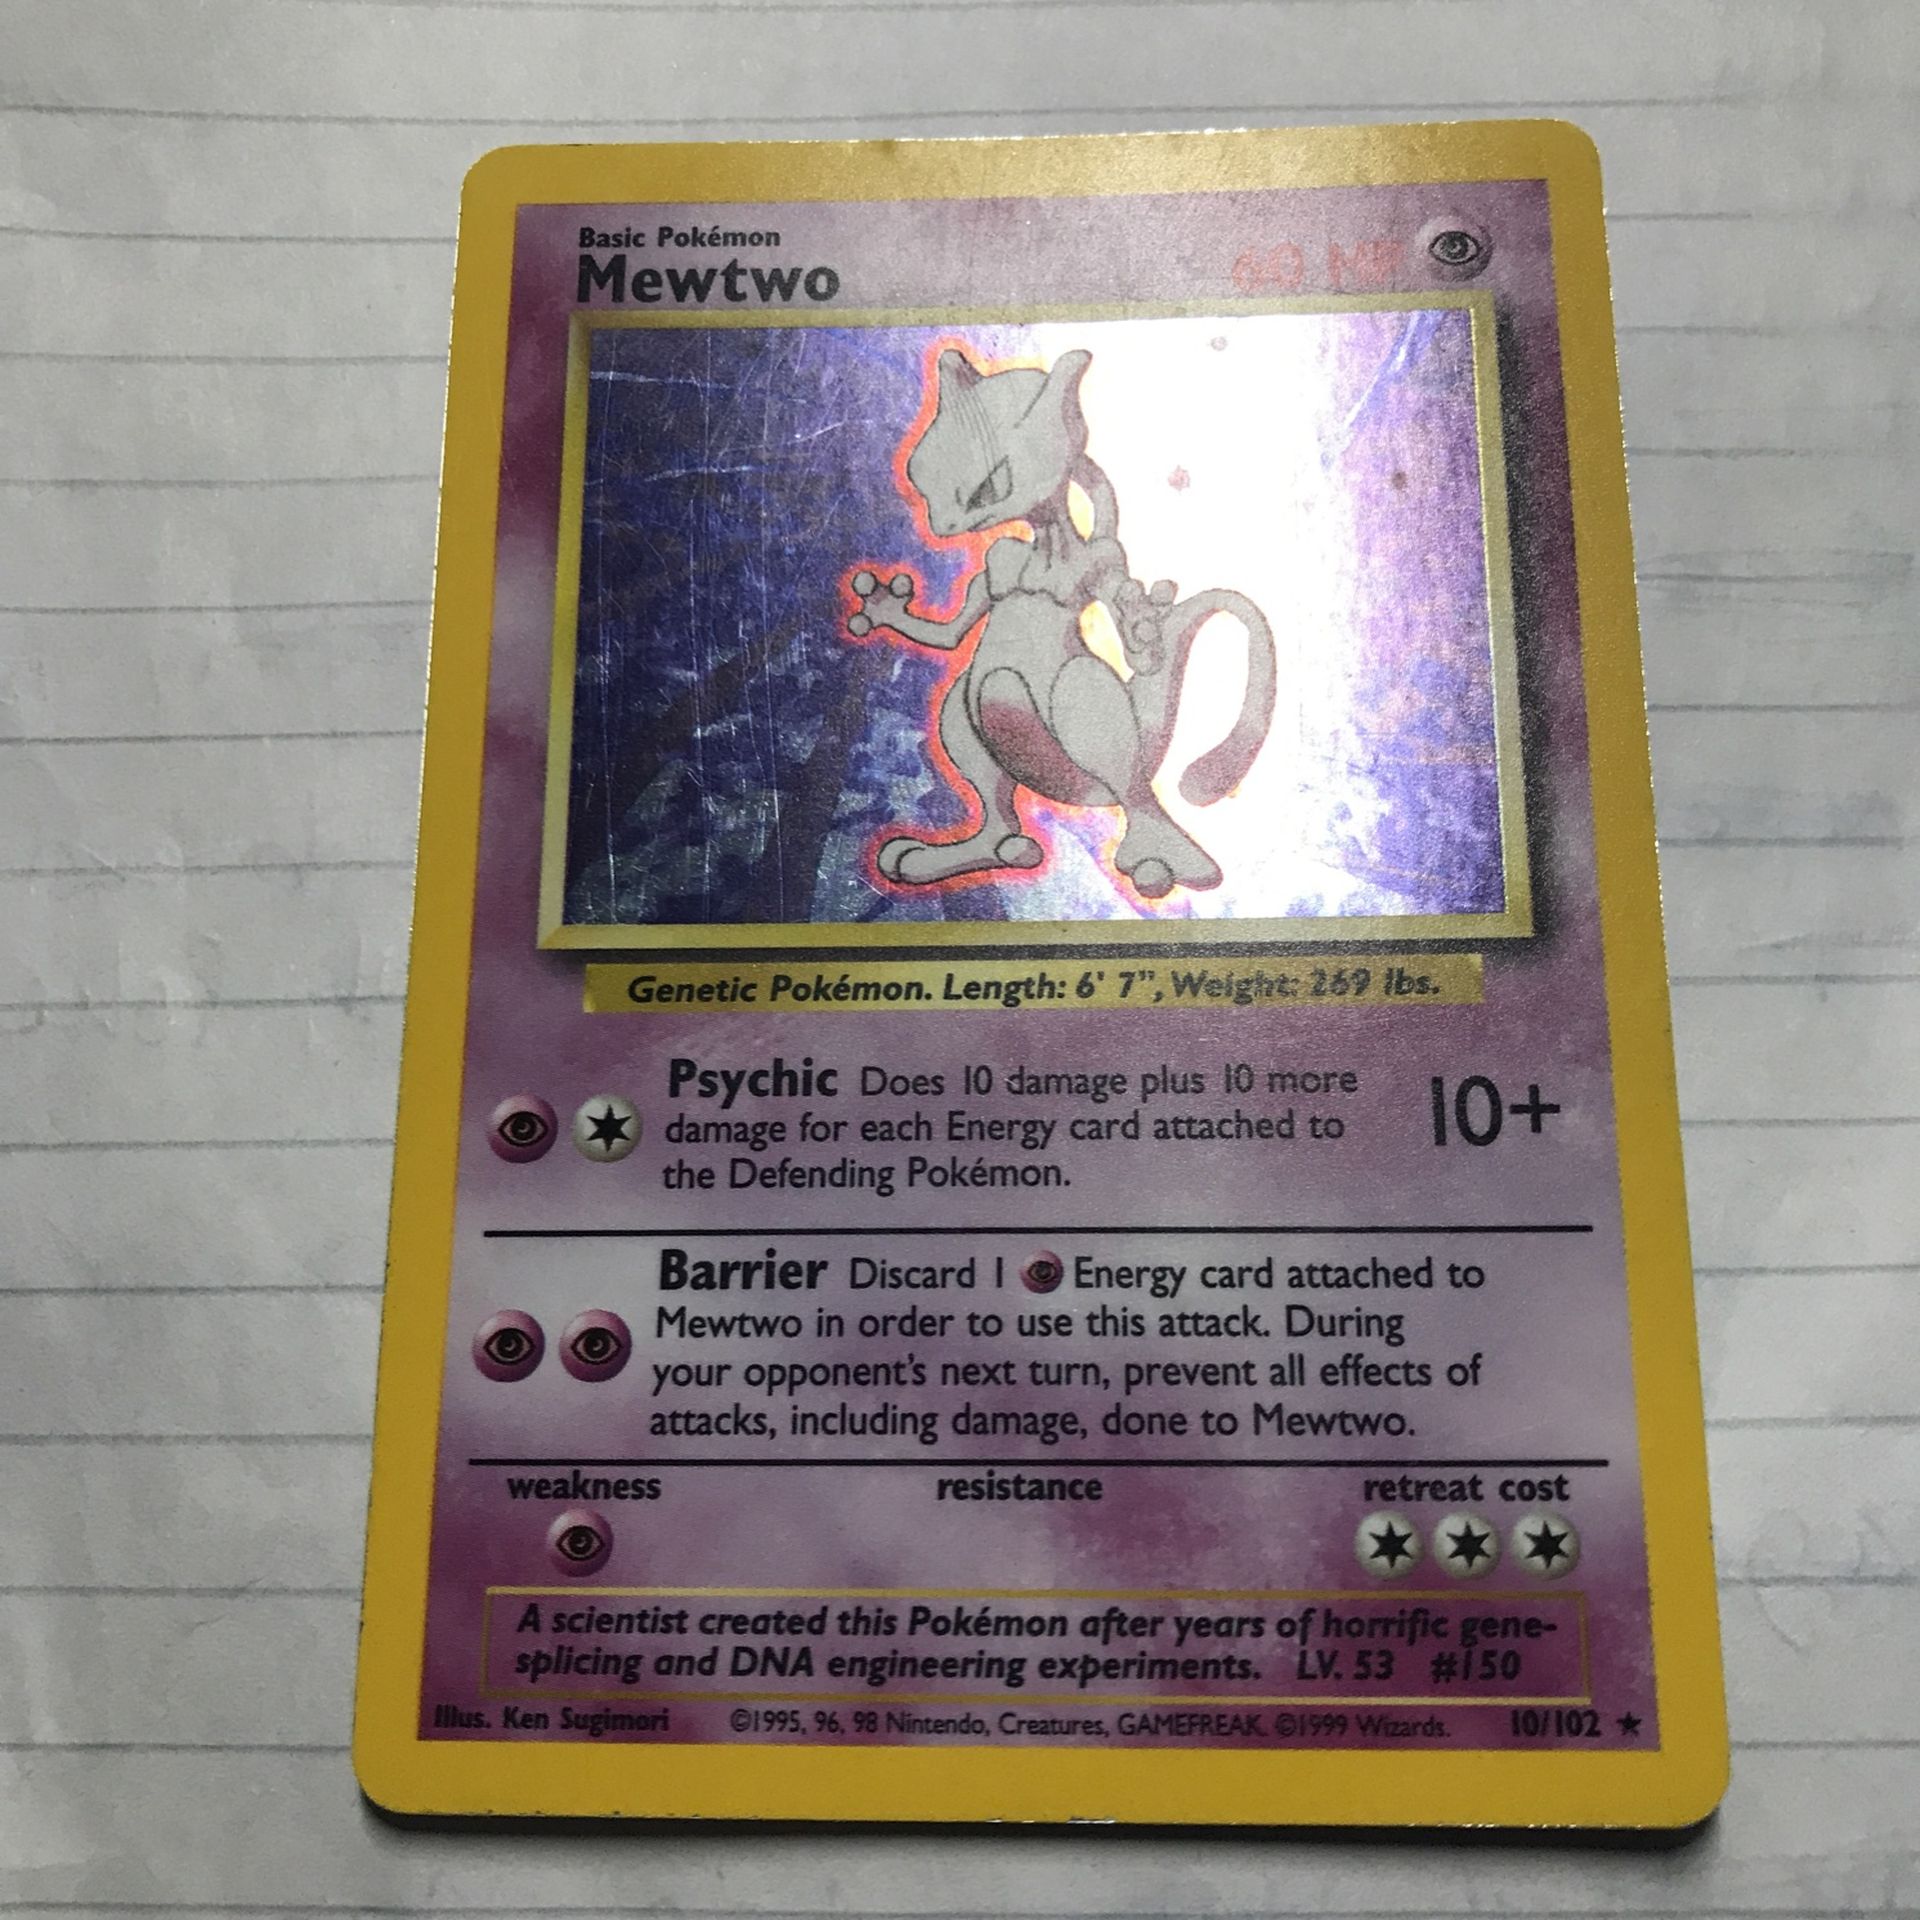 Mewtwo Holo Pokémon Card In Excellent Condition